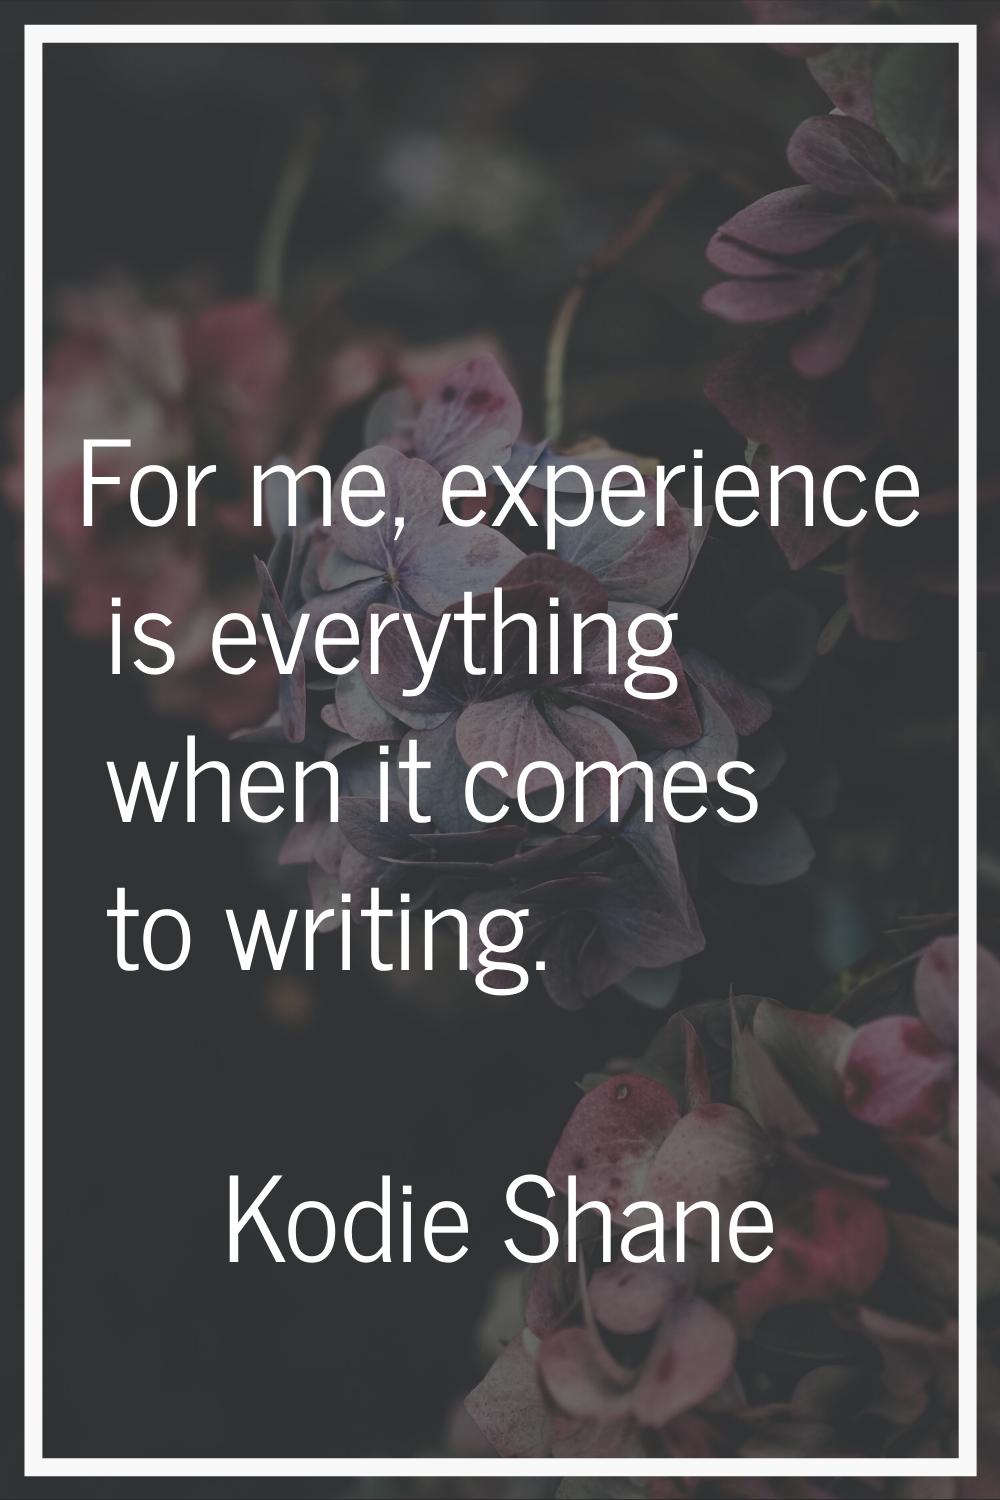 For me, experience is everything when it comes to writing.